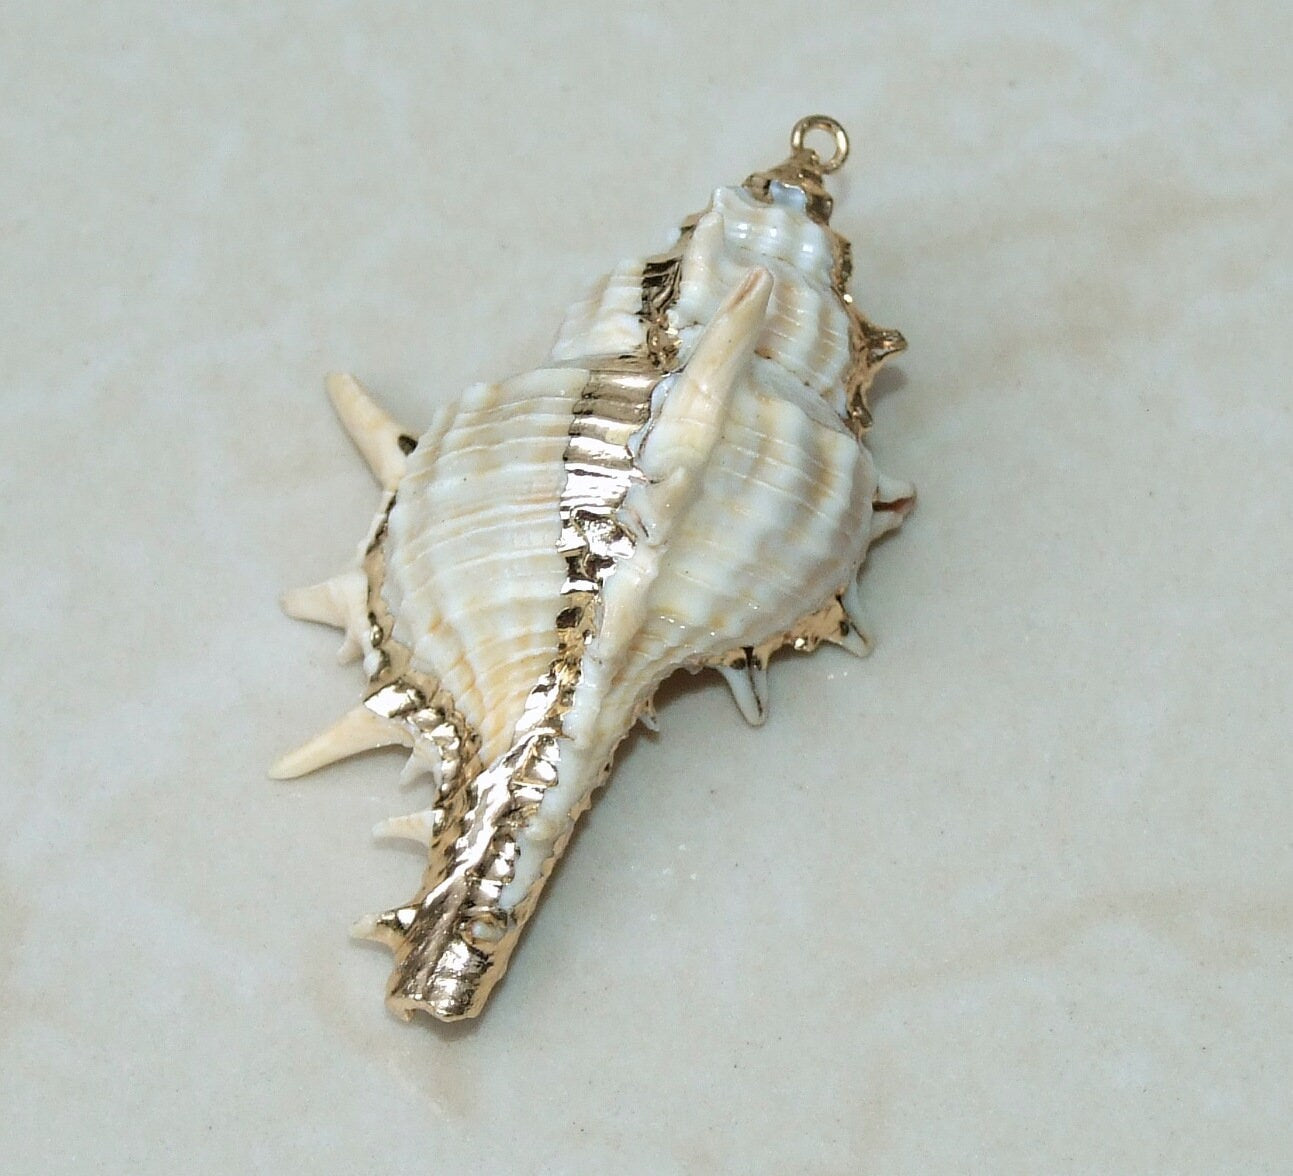 Natural Murex Turnispina Seashell Pendant, Gold Edge, Spiral Shell Bead, Display Shell, Jewelry Shell, Conch Shell, Beach Decor, 50-70mm